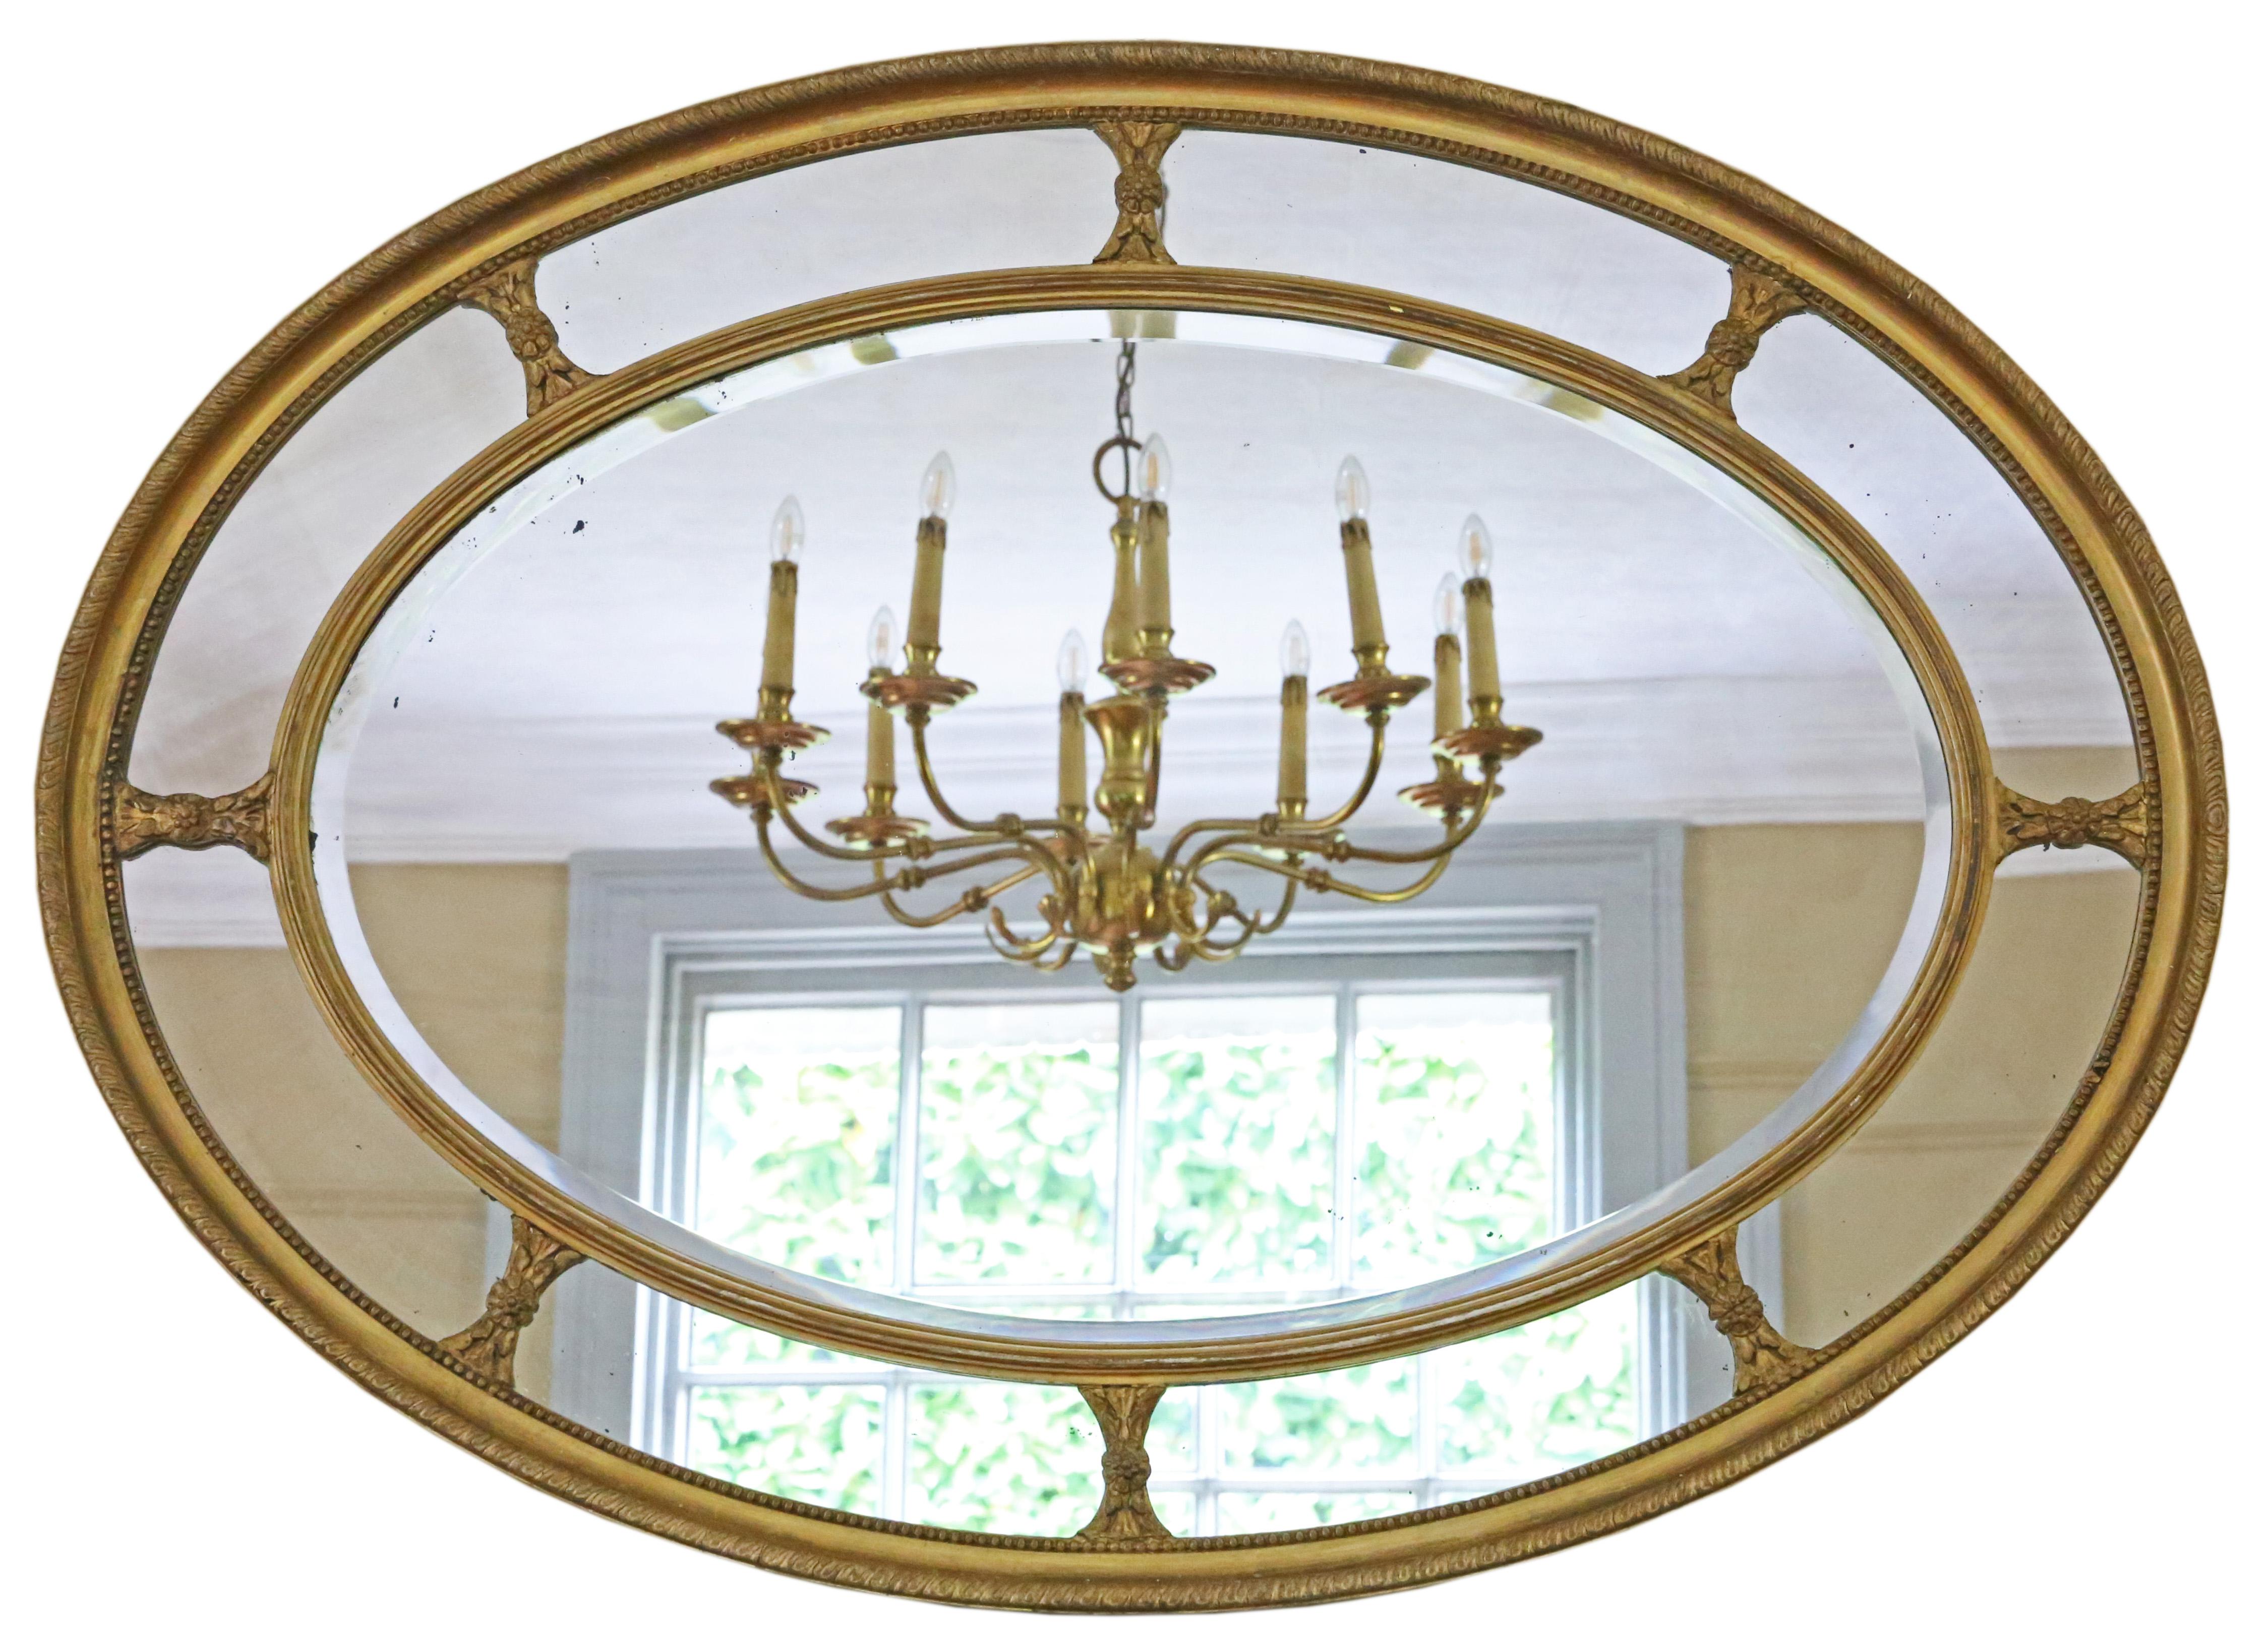 Antique large fine quality oval gilt overmantle cushion wall mirror 19th Century.

An impressive rare find, that would look amazing in the right location. No loose joints or woodworm.

The main bevel edge mirrored glass and outer segments have light